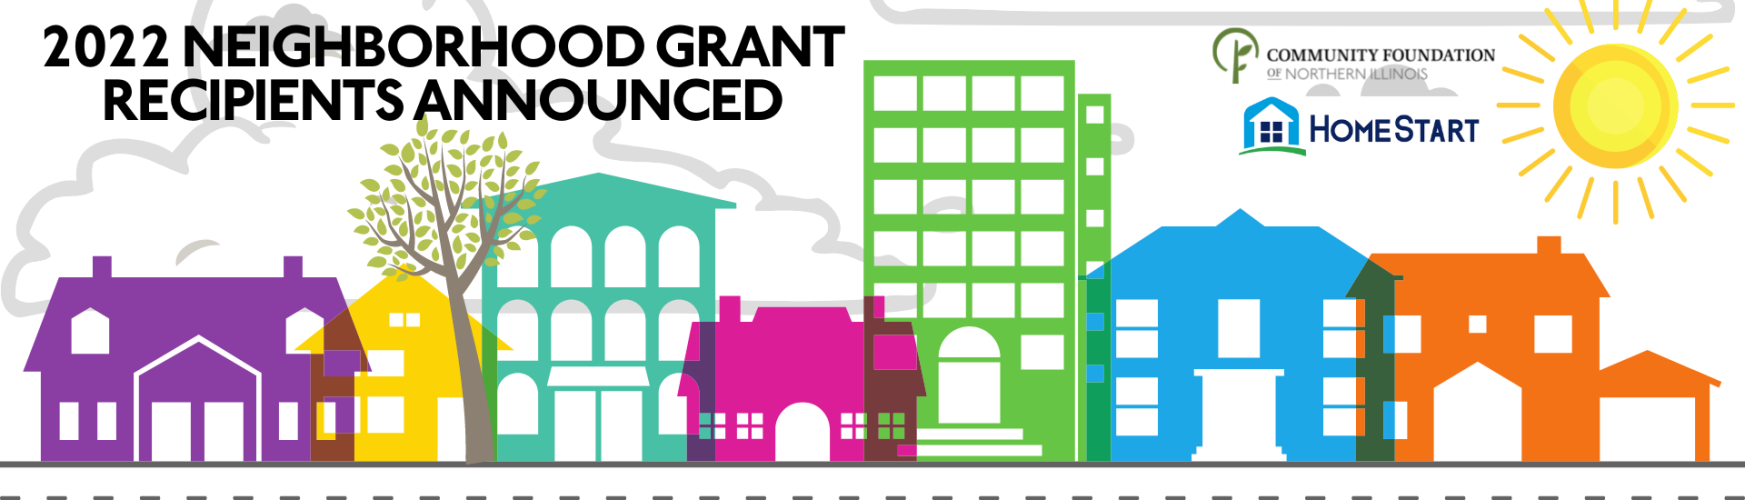 graphic of colorful houses and buildings along a street. sunshine, clouds, and trees in the background. Title reads: 2022 Neighborhood Grant Recipients Announced